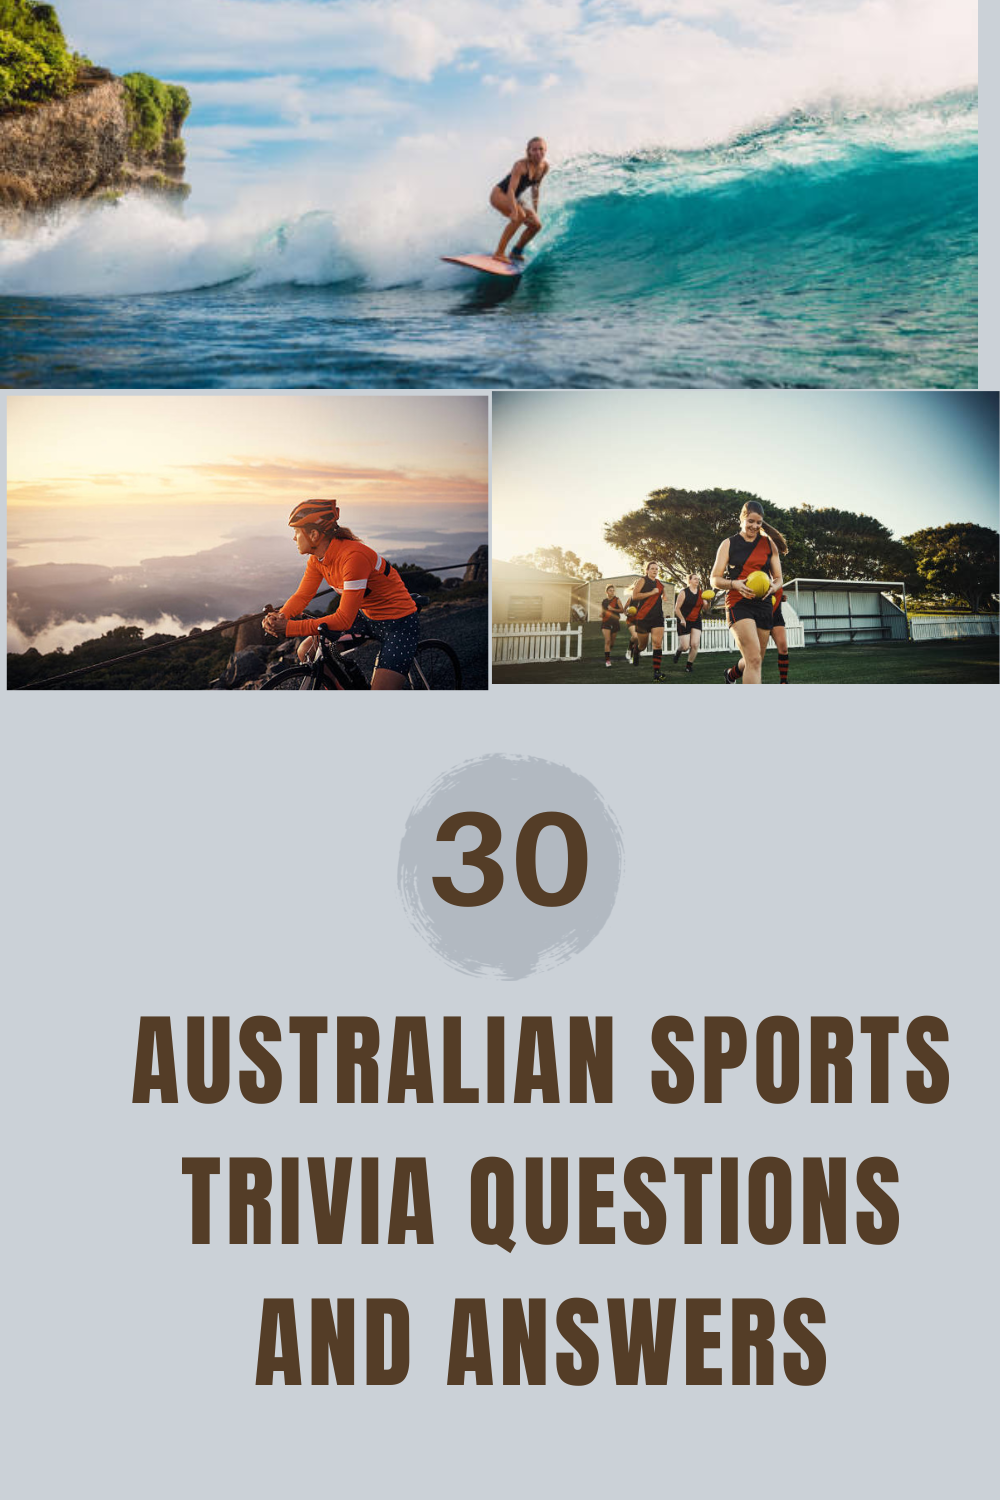 Australian Sports Trivia Questions and Answers